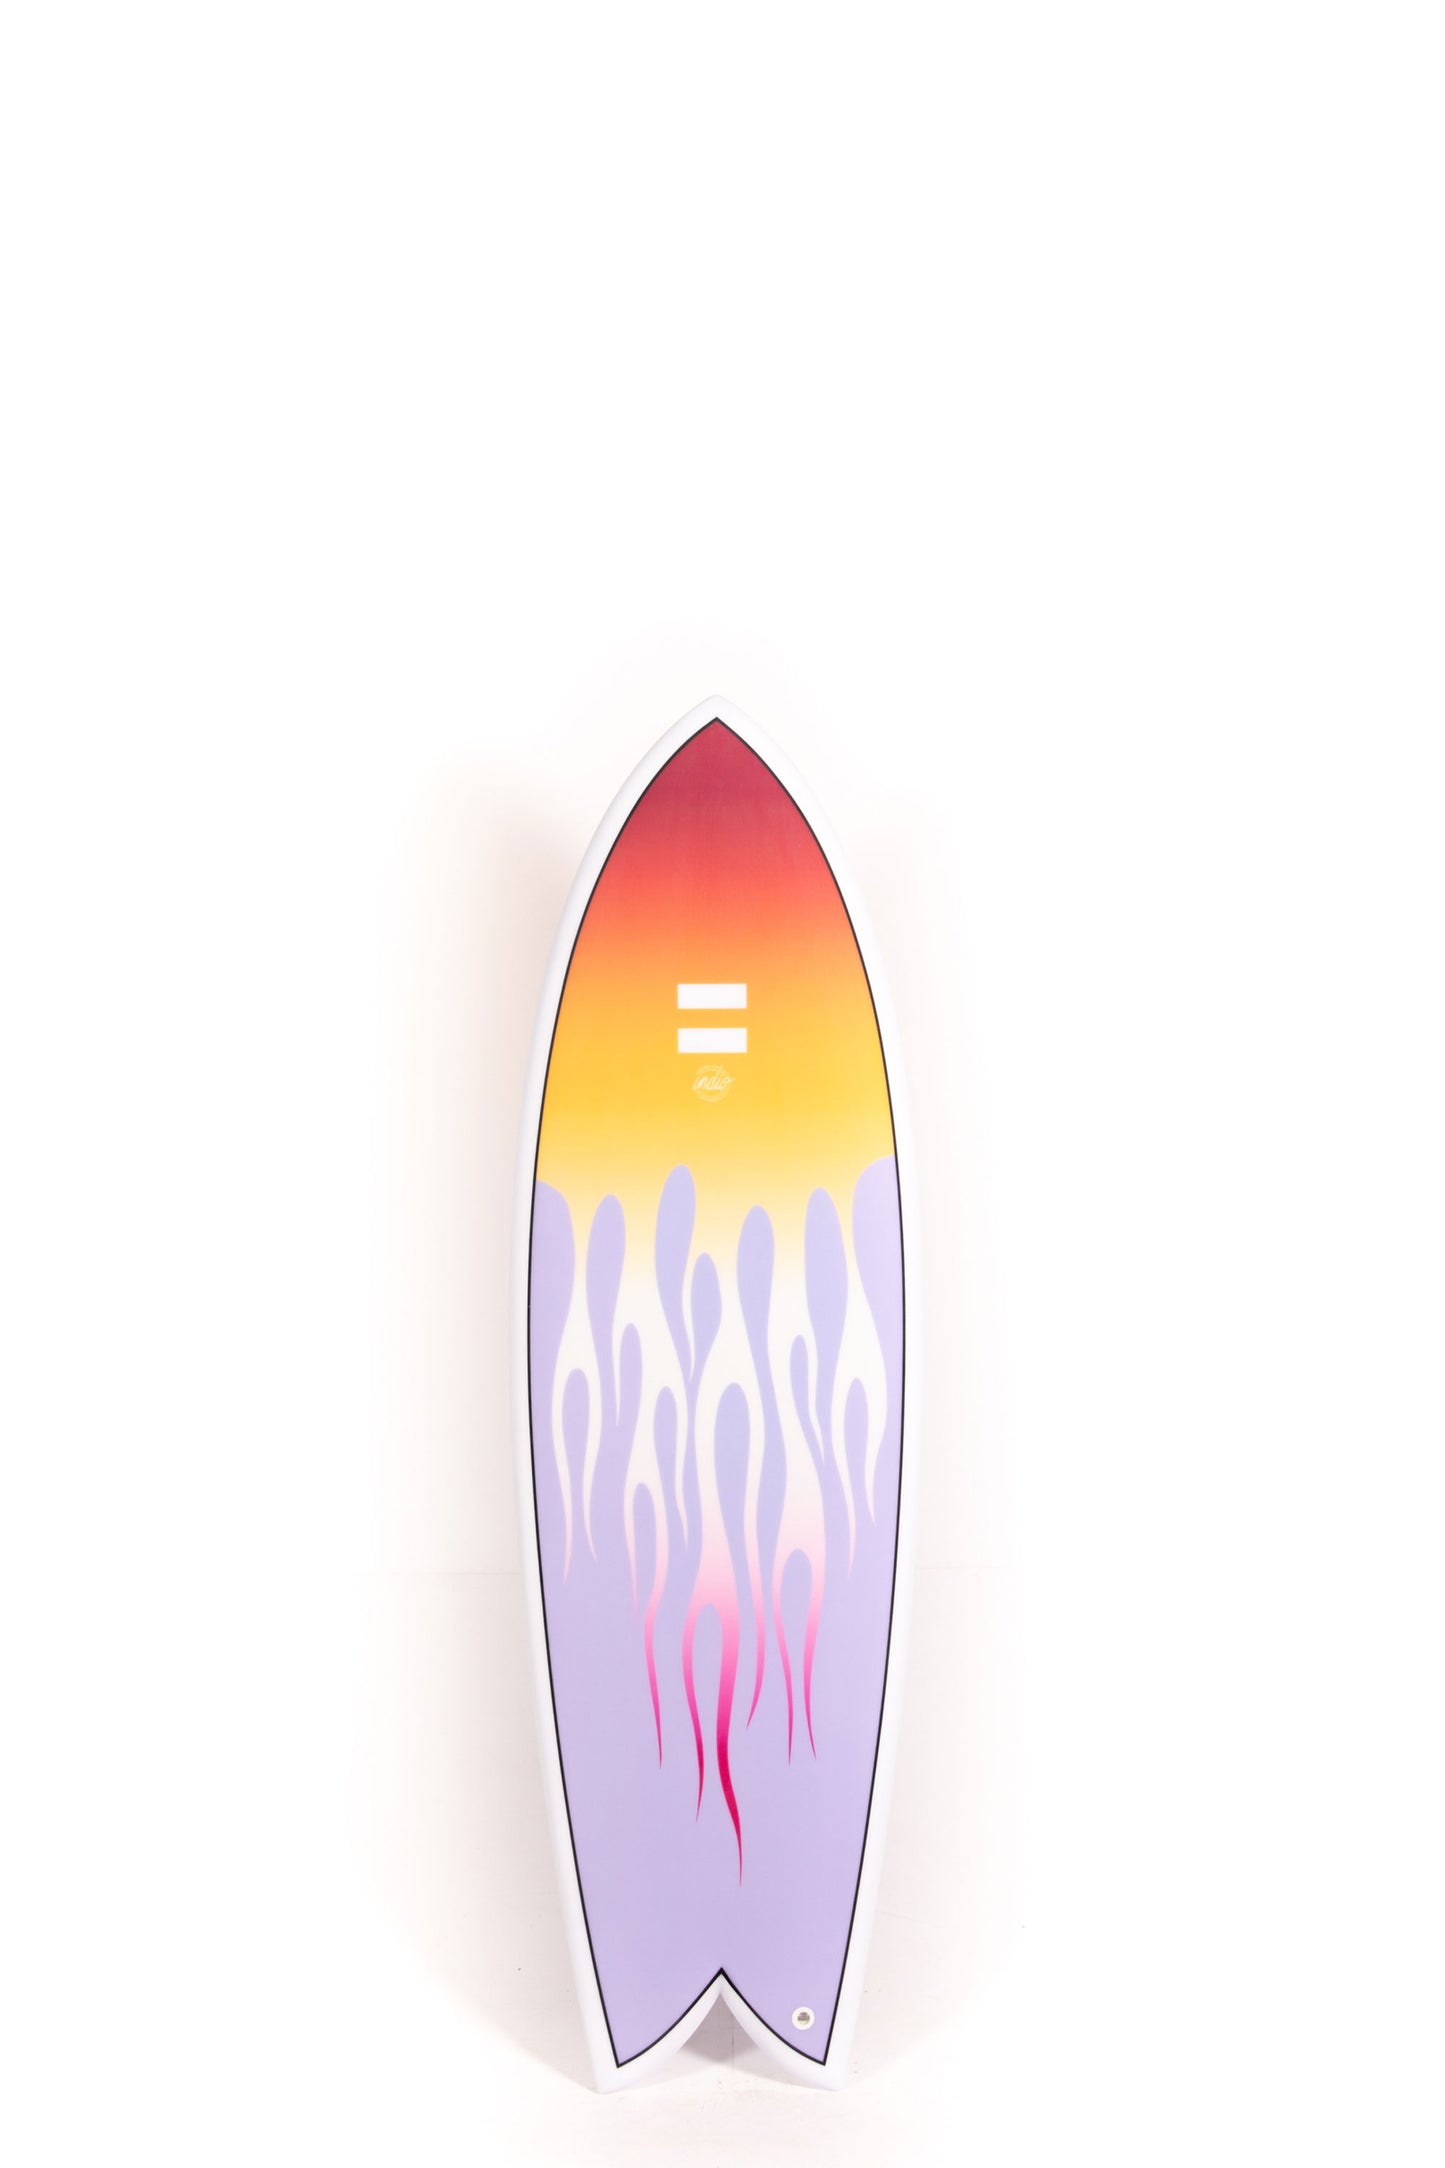 Pukas-Surf-Shop-Indio-Surfboards-Dab-fire-5_11